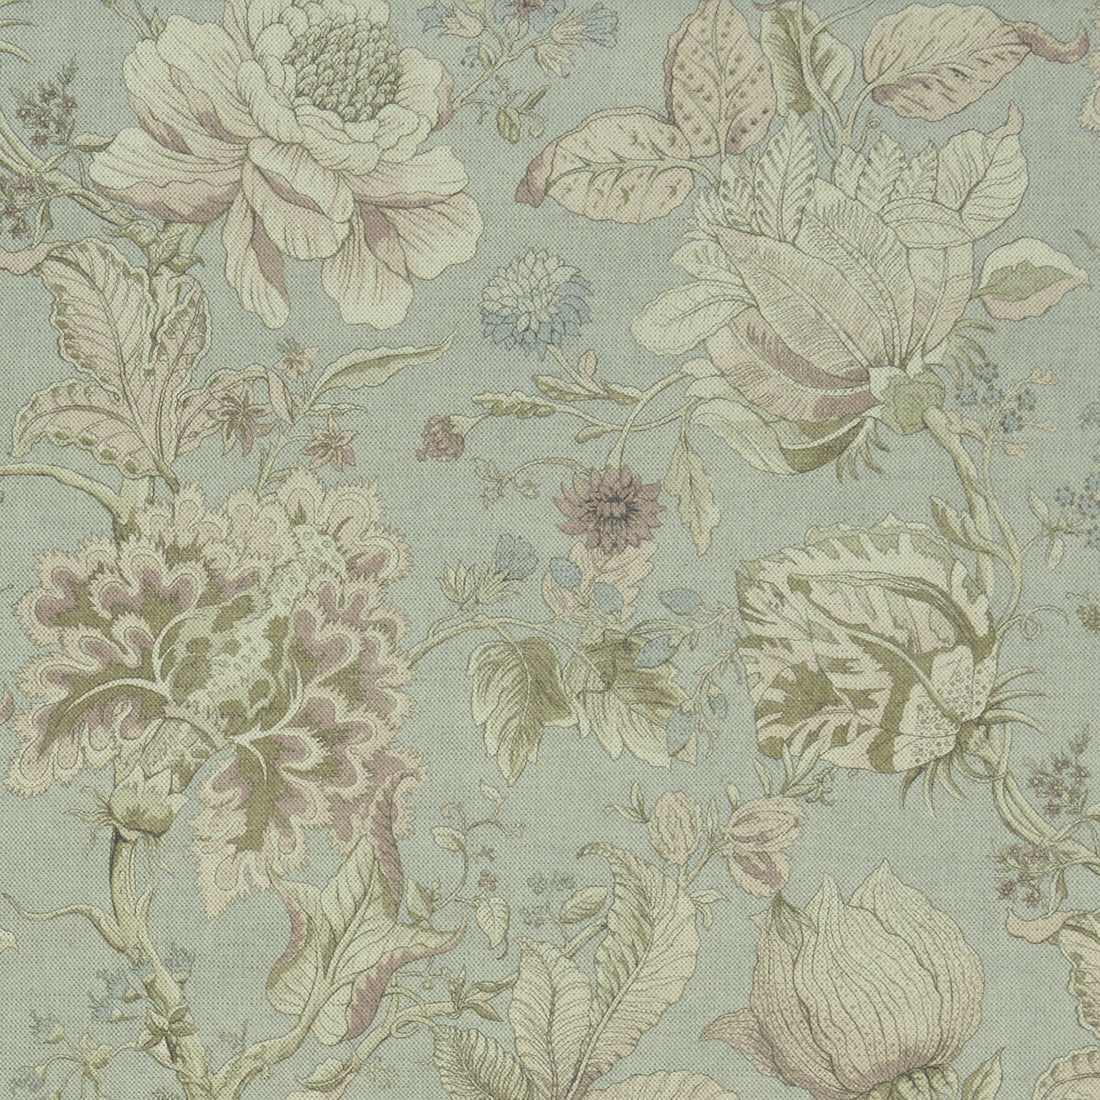 Sissinghurst fabric in mineral/blush color - pattern F1048/06.CAC.0 - by Clarke And Clarke in the Clarke &amp; Clarke Castle Garden collection